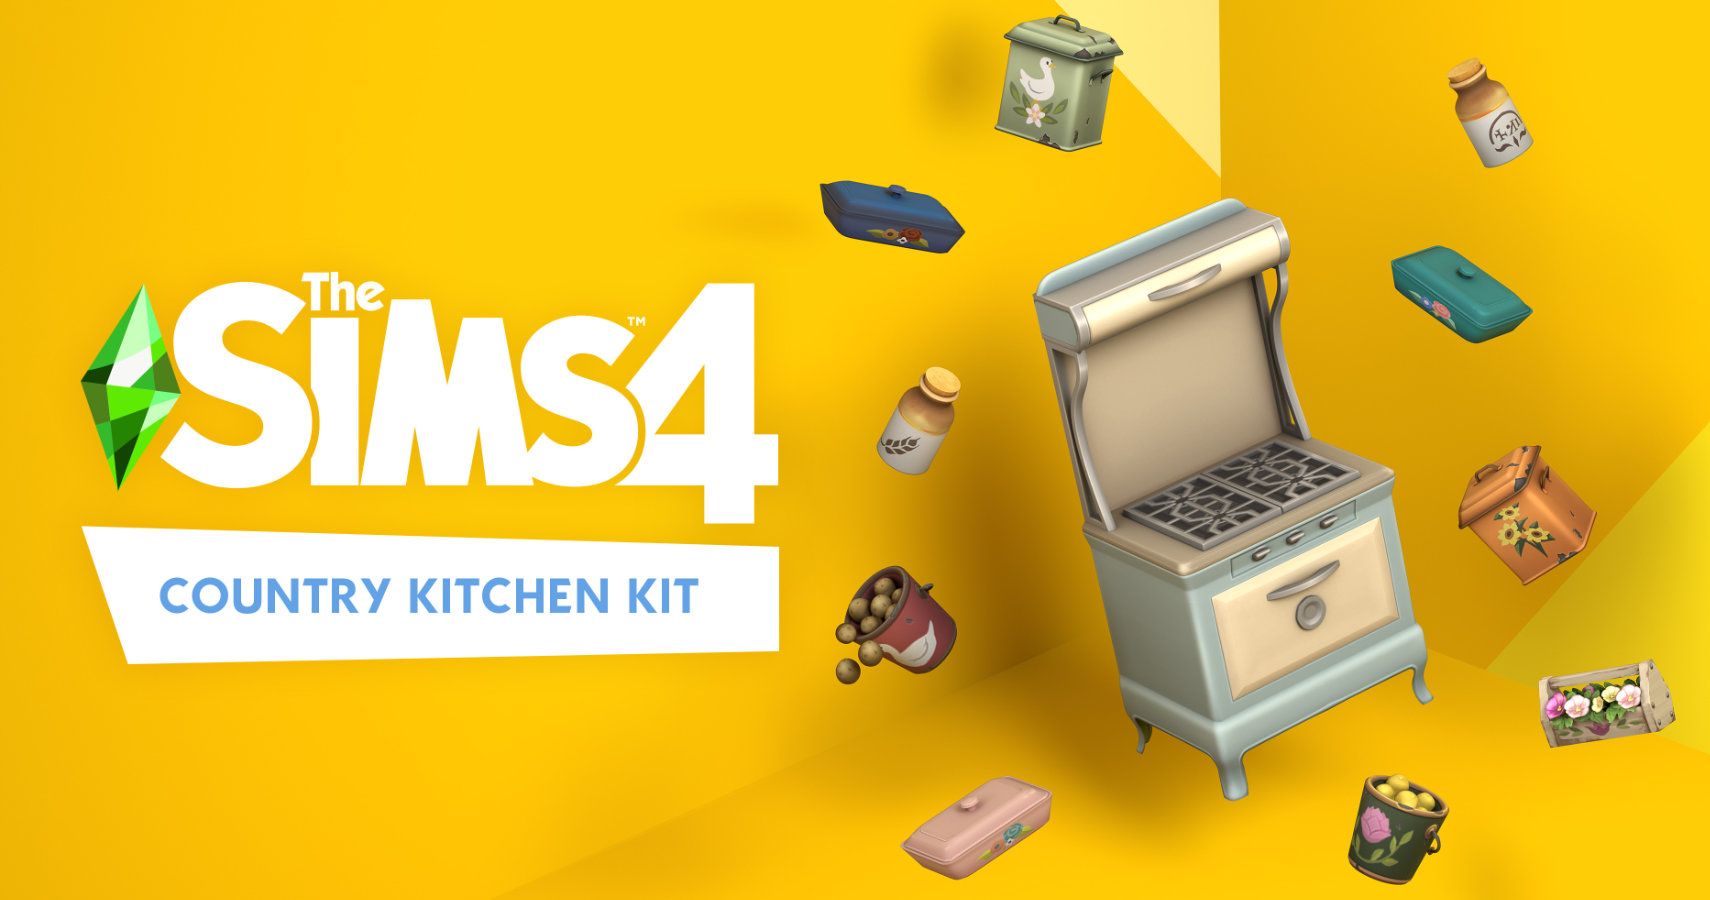 Country kitchen kit items behind a sims 4 logo